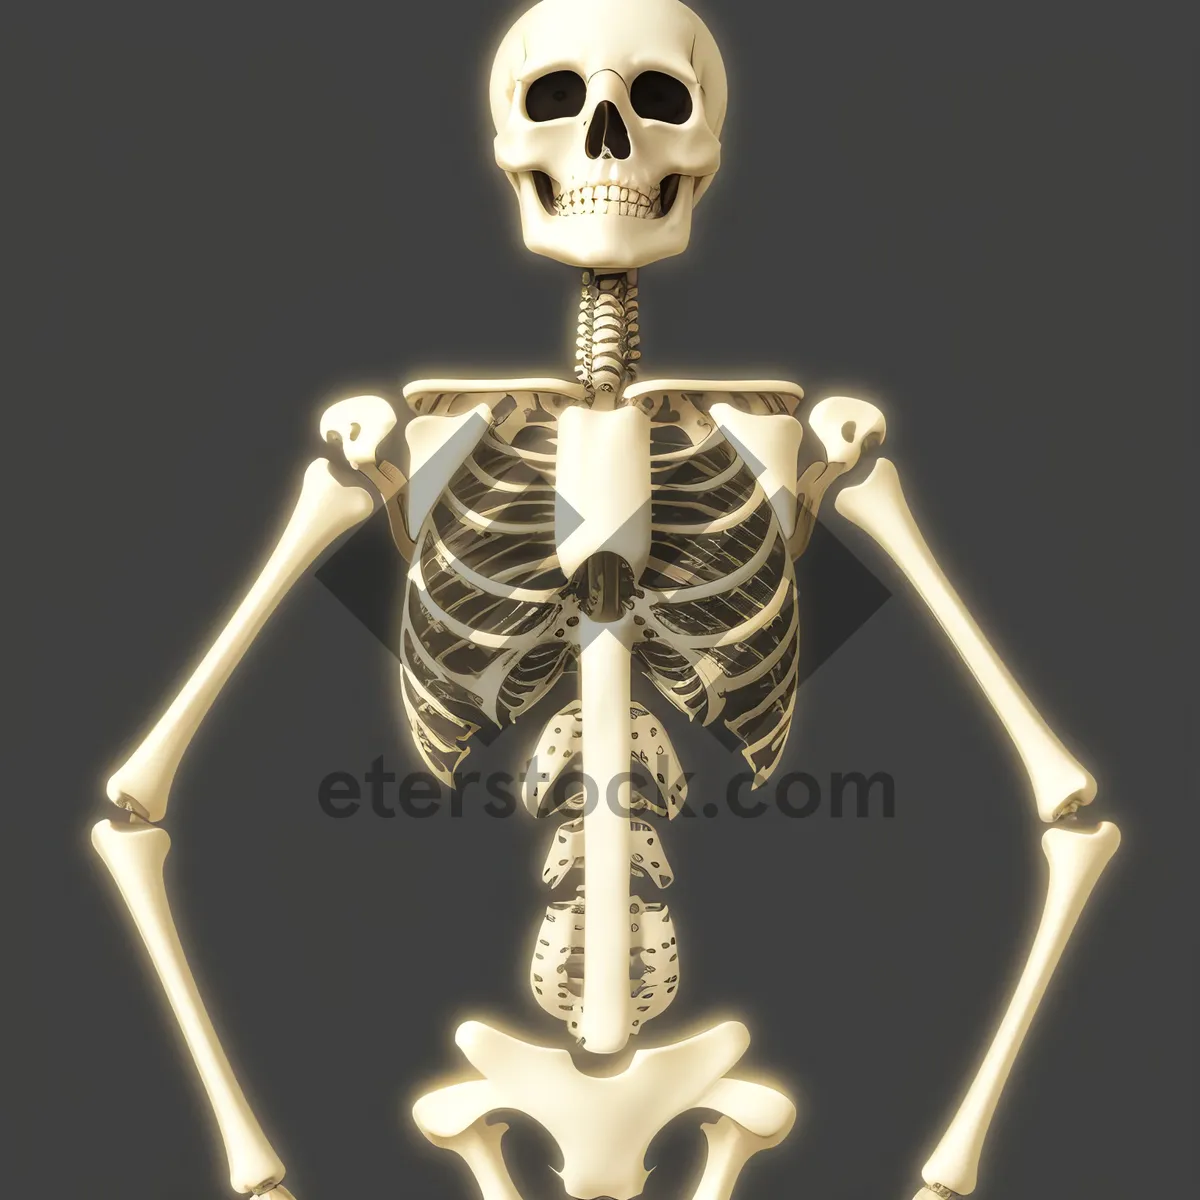 Picture of Skeletal anatomy: X-ray view of human torso